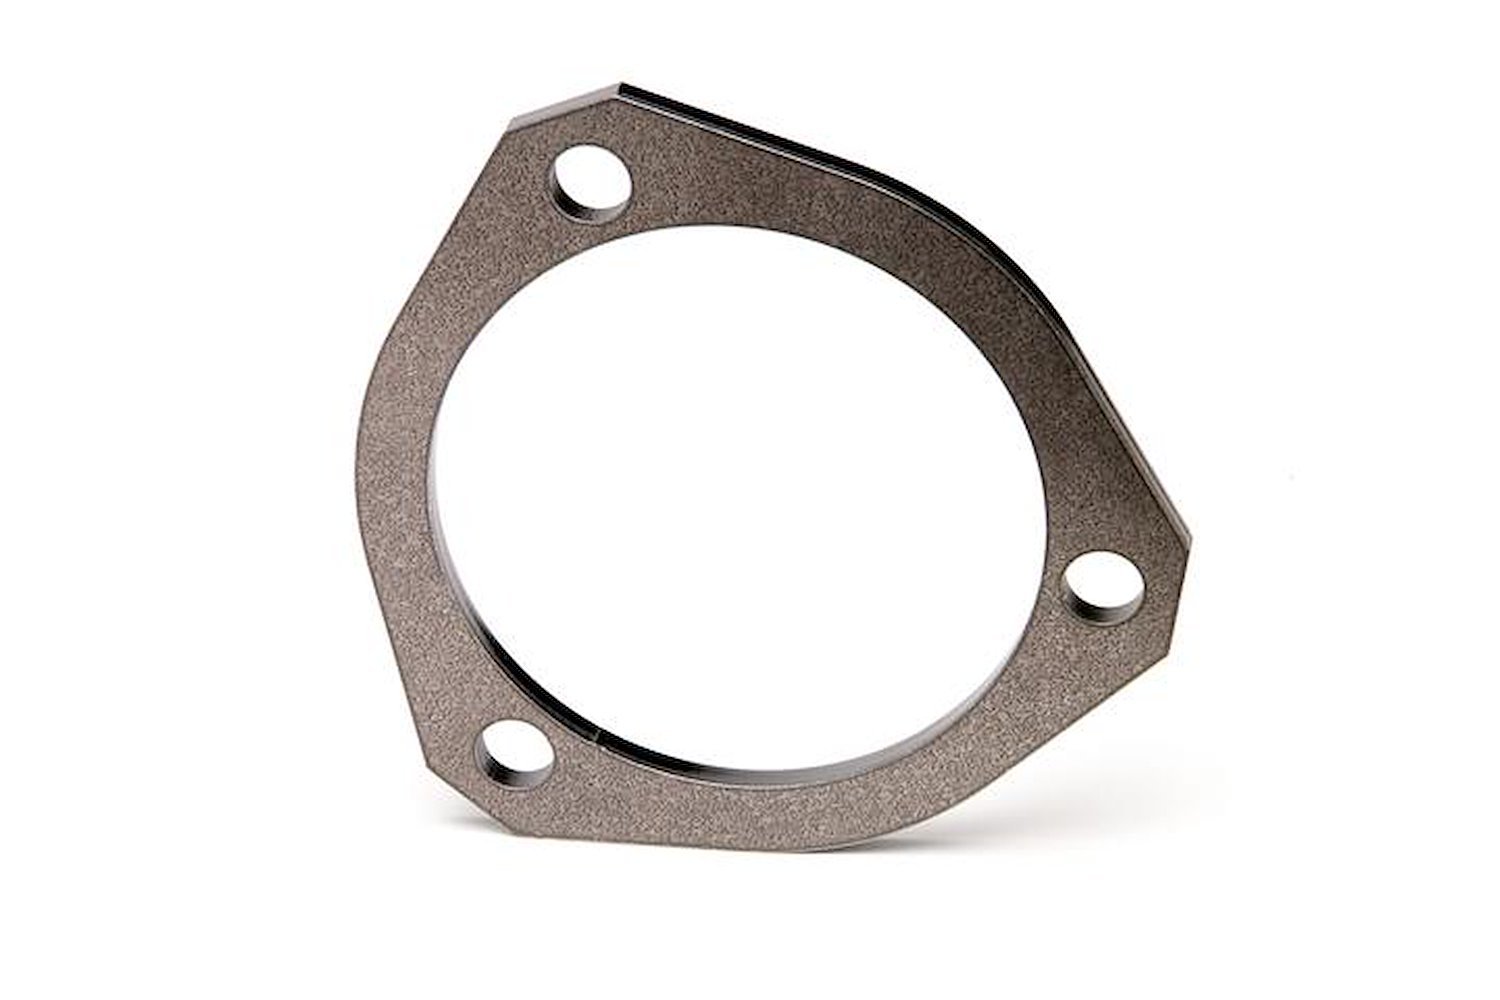 OGS930 WJ Steering Conversion Knuckle Flange Spacer 1984-2001 Jeep Cherokee, 1986-1992 Jeep Comanche, 1997-2006 Jeep Wrangler TJ